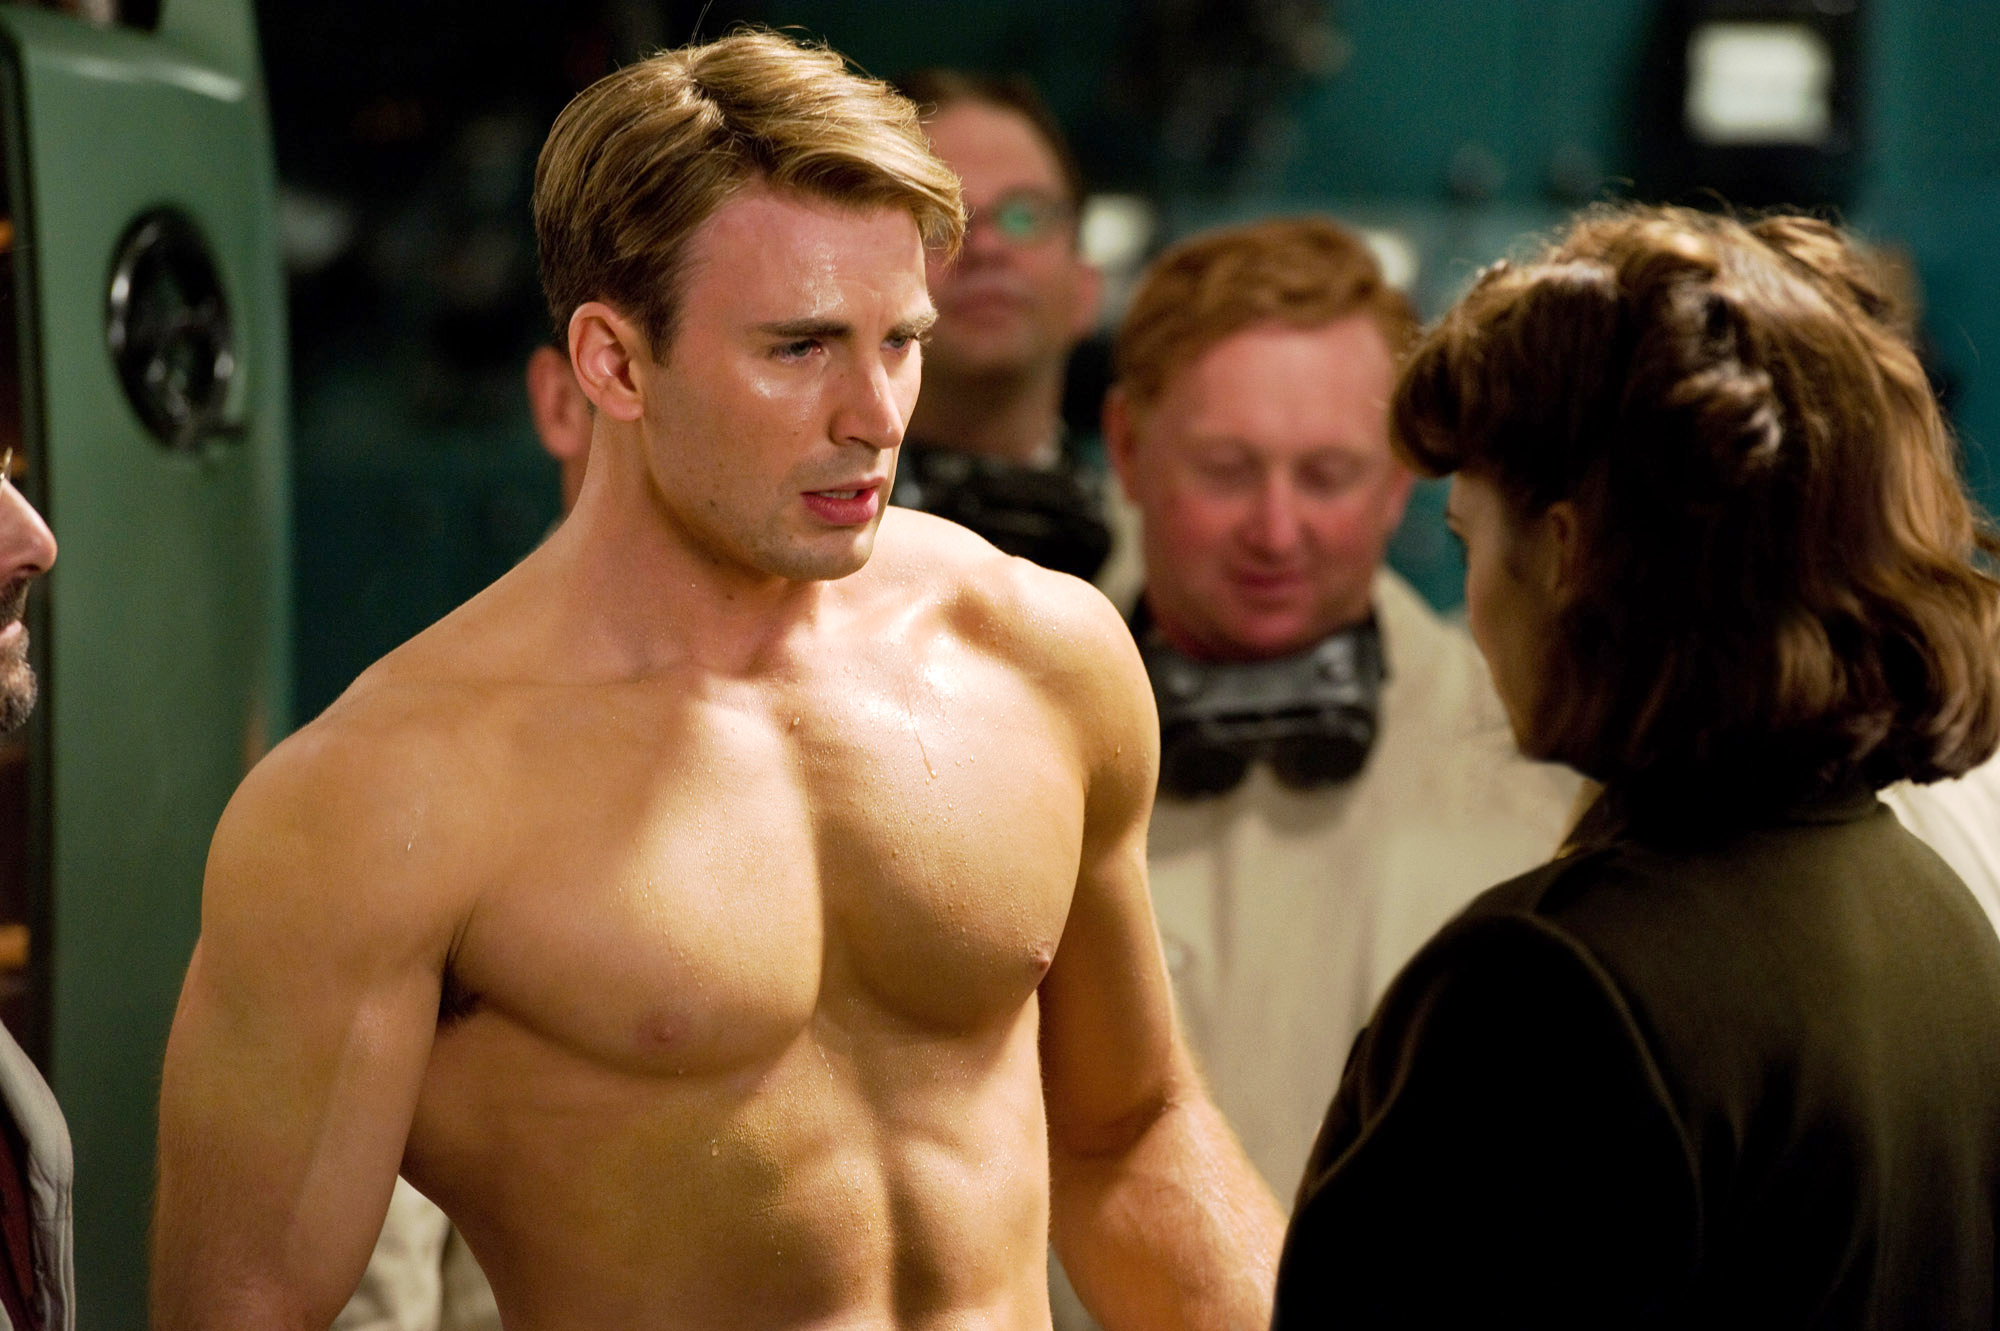 Chris Evans stars as Steve Rogers and Hayley Atwell stars as Peggy Carter in Paramount Pictures' Captain America: The First Avenger (2011). Photo credit by: Jay Maidment.